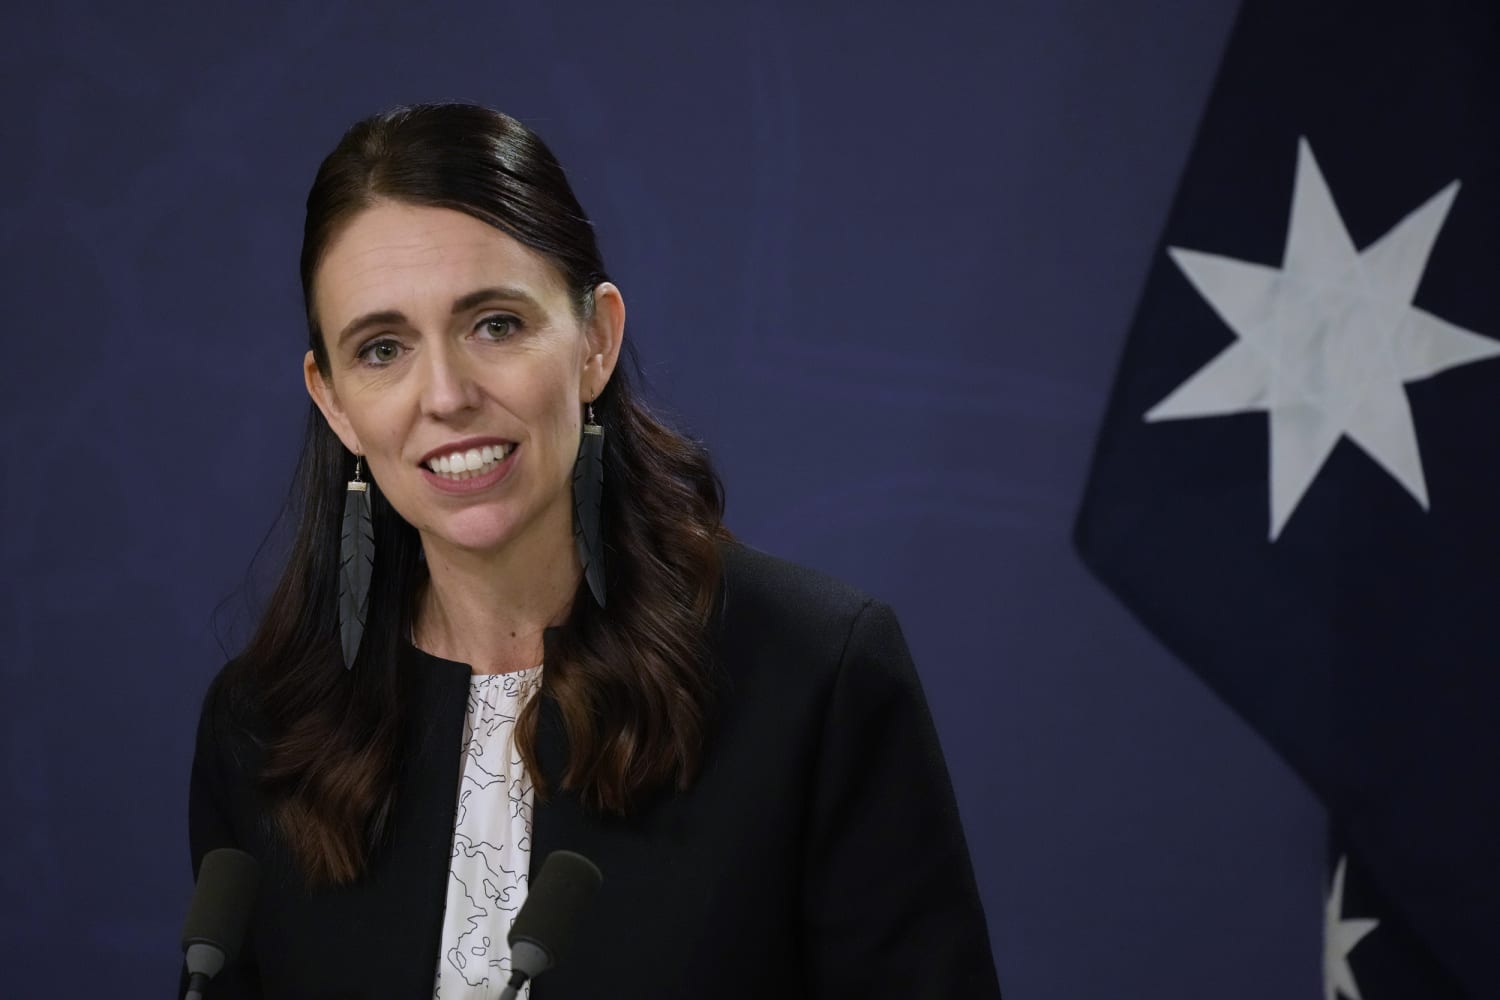 Jacinda Ardern becomes a dame as New Zealand honors her service during shooting, Covid-19